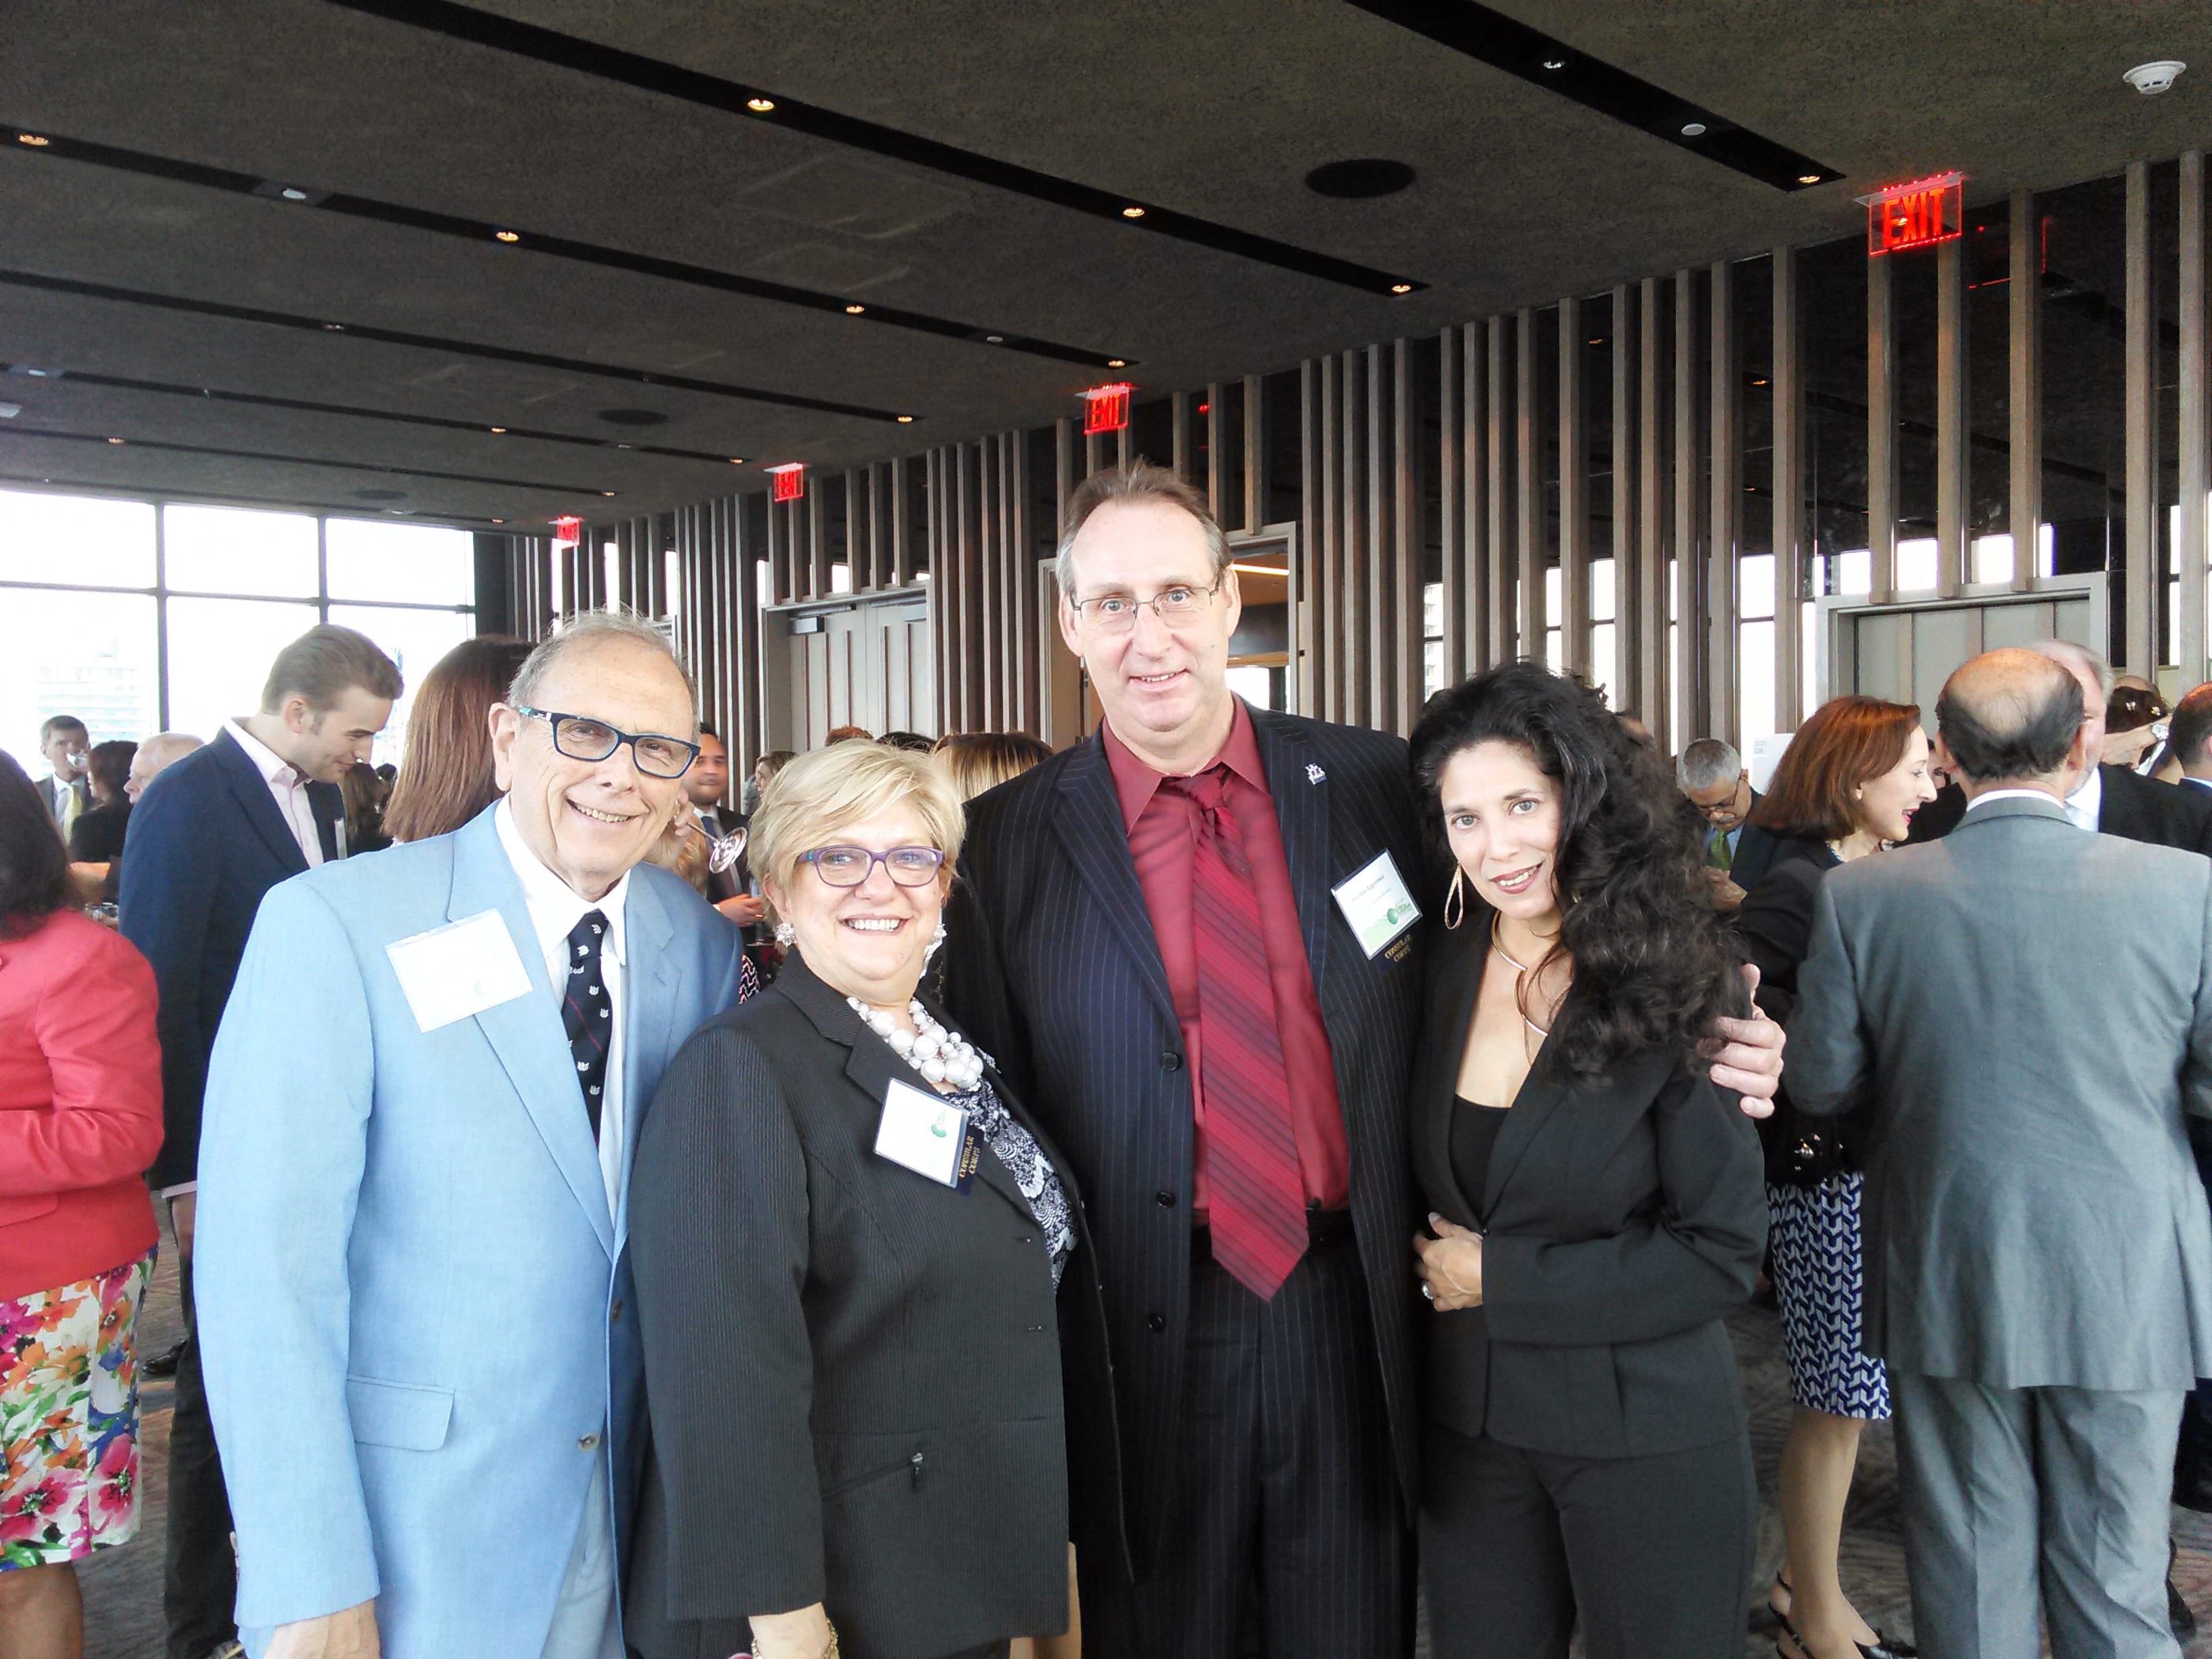 Graduate School Represented at the Greater Miami Chamber of Commerce